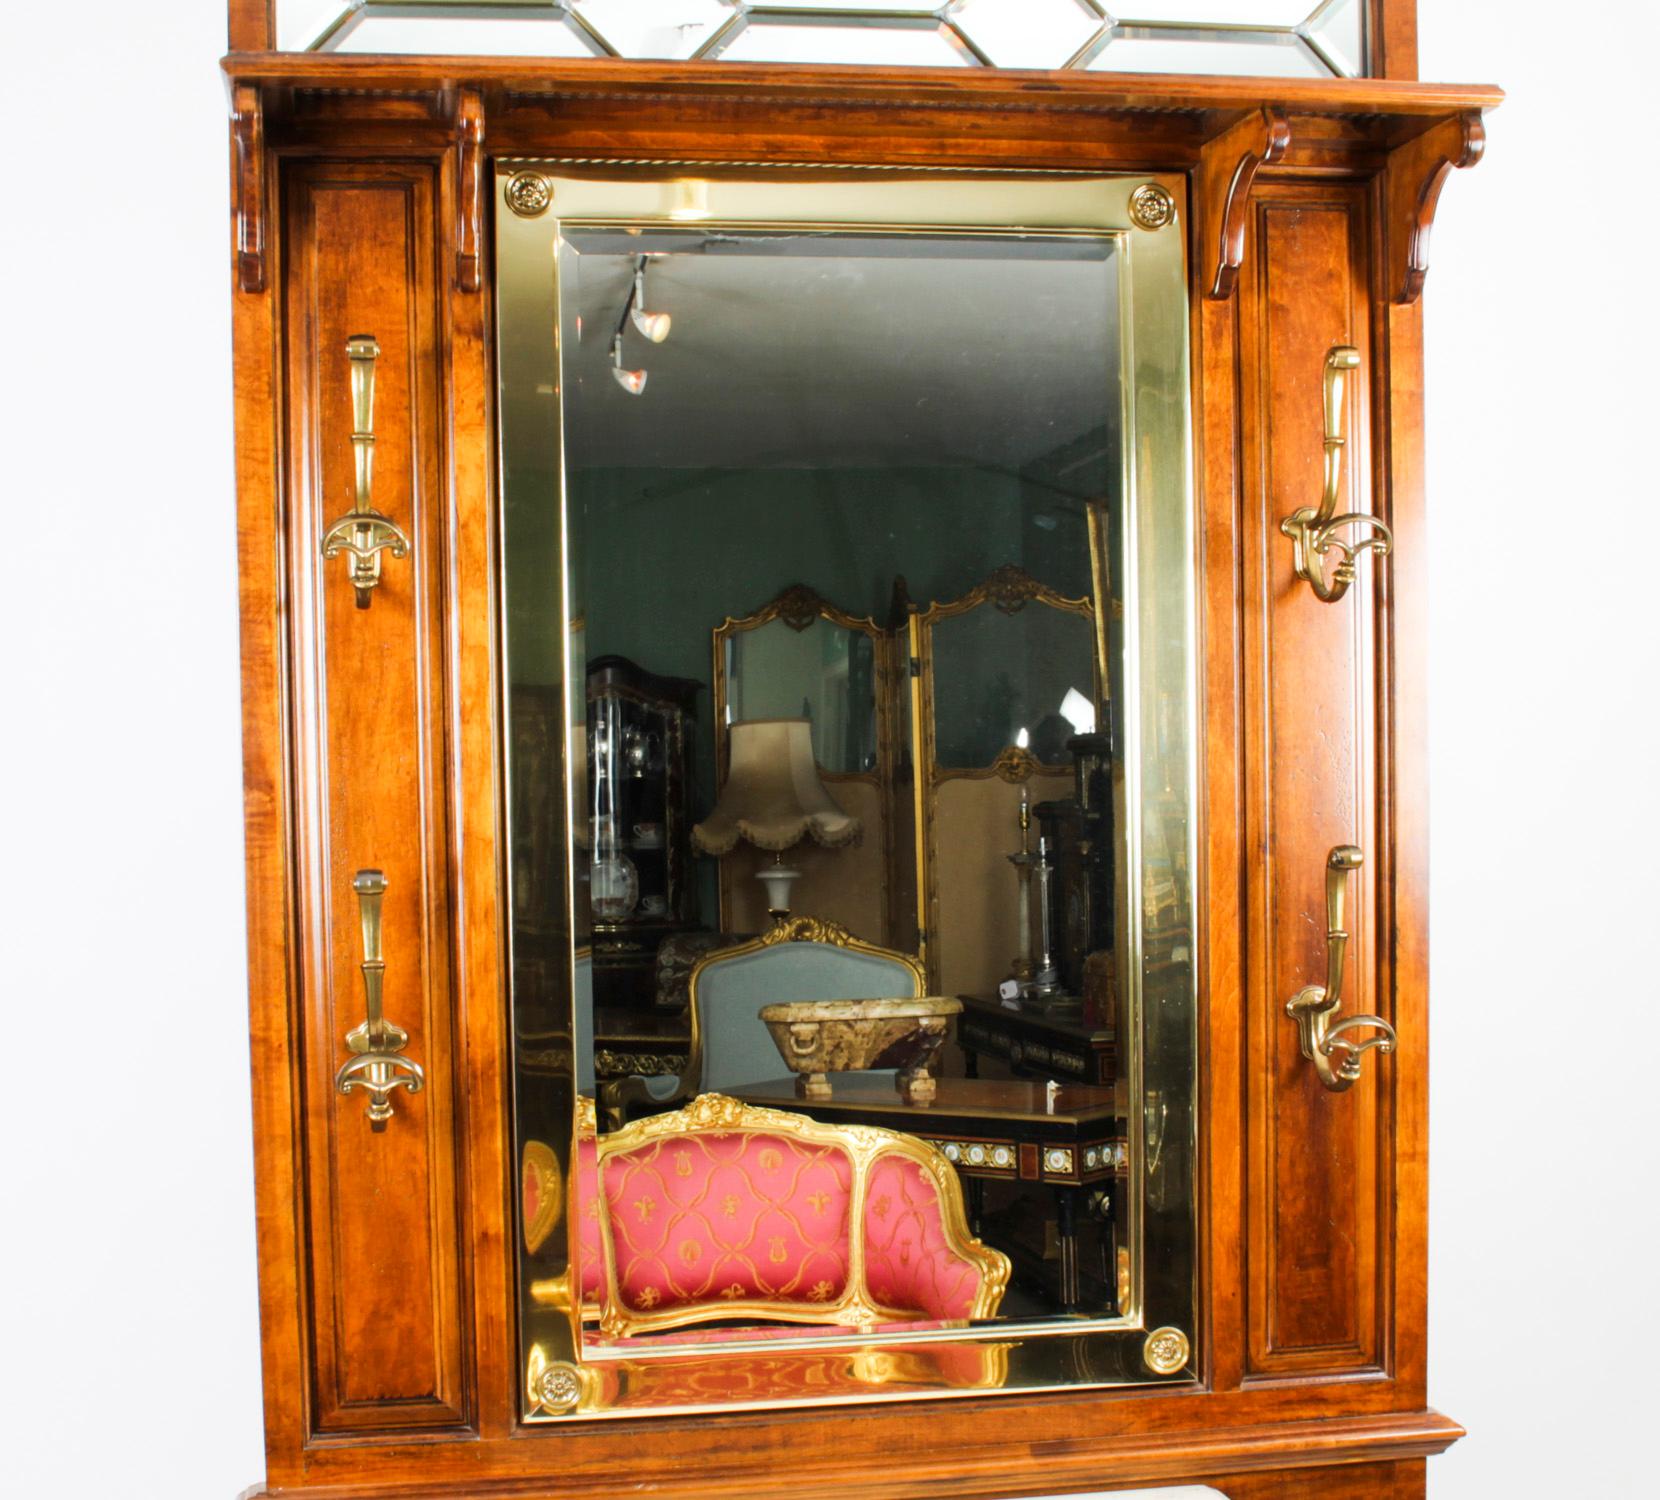 This is a stylish Victorian Revival oak hall stand, mid 20th century in date.

The hallstand features an inset bevelled mirror back with brass hooks above a marble top and drawer.

There is ample space to accommodate your coats, umbrellas and